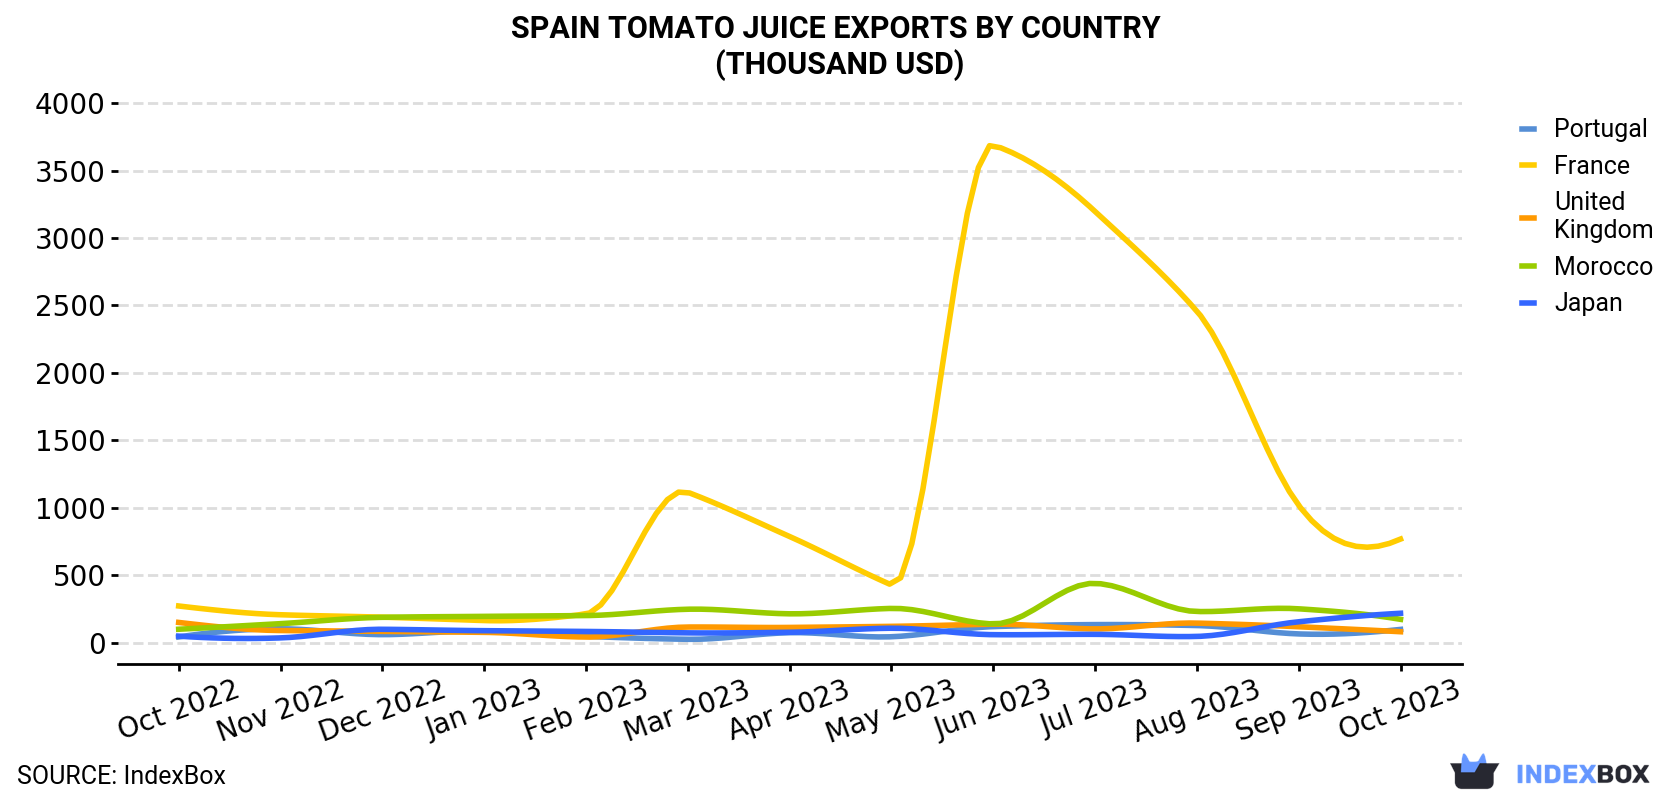 Spain Tomato Juice Exports By Country (Thousand USD)